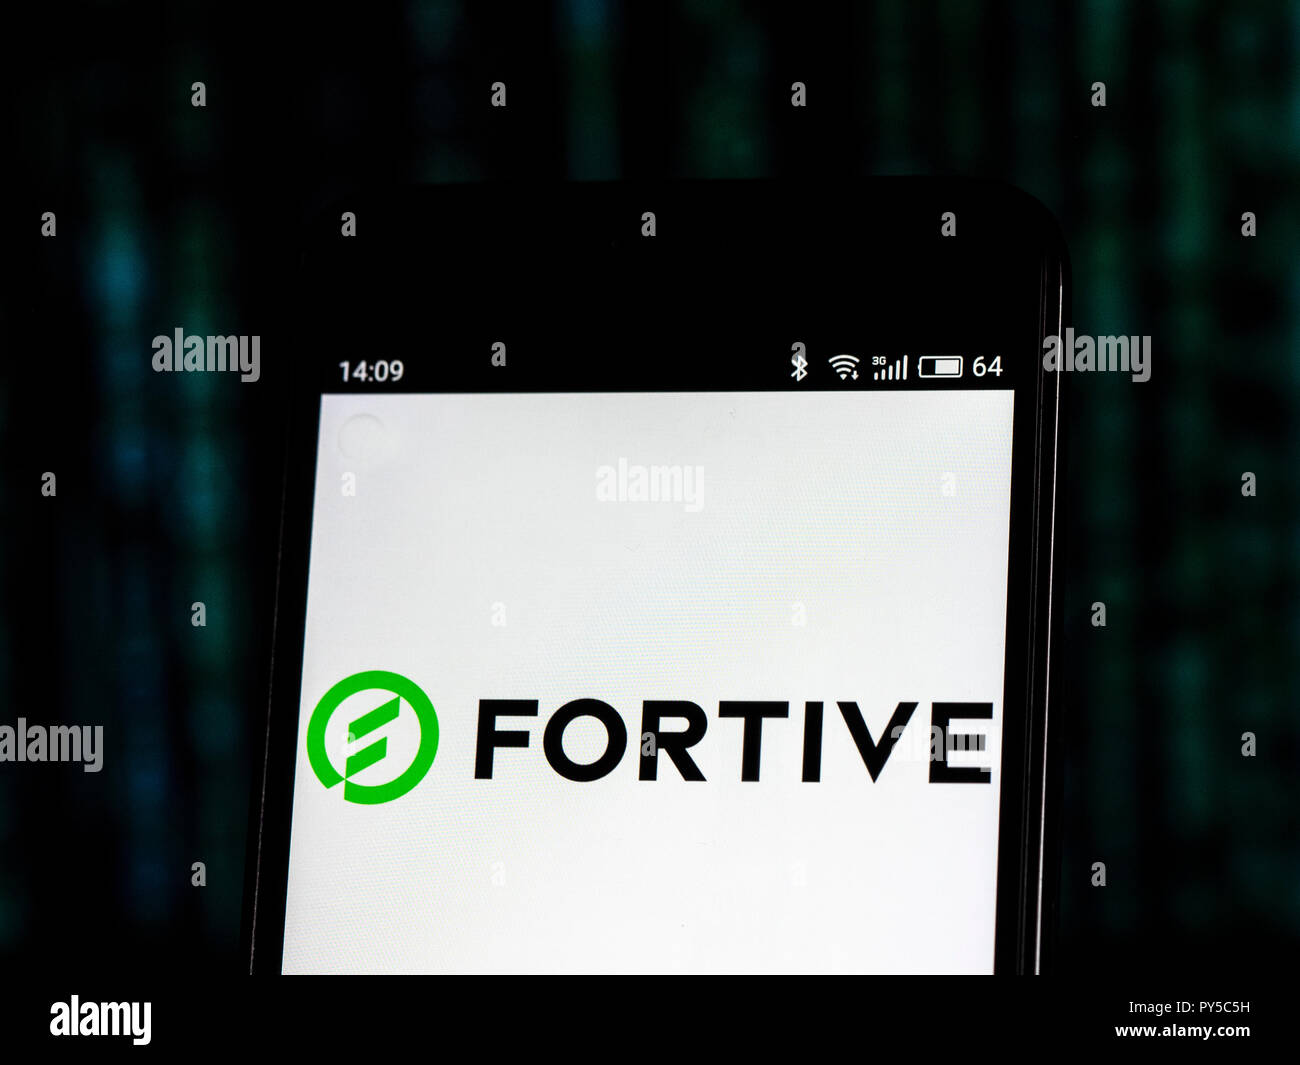 Fortive Industrial conglomerate company logo seen displayed on smart phone. Fortive is a diversified industrial conglomerate company. Stock Photo